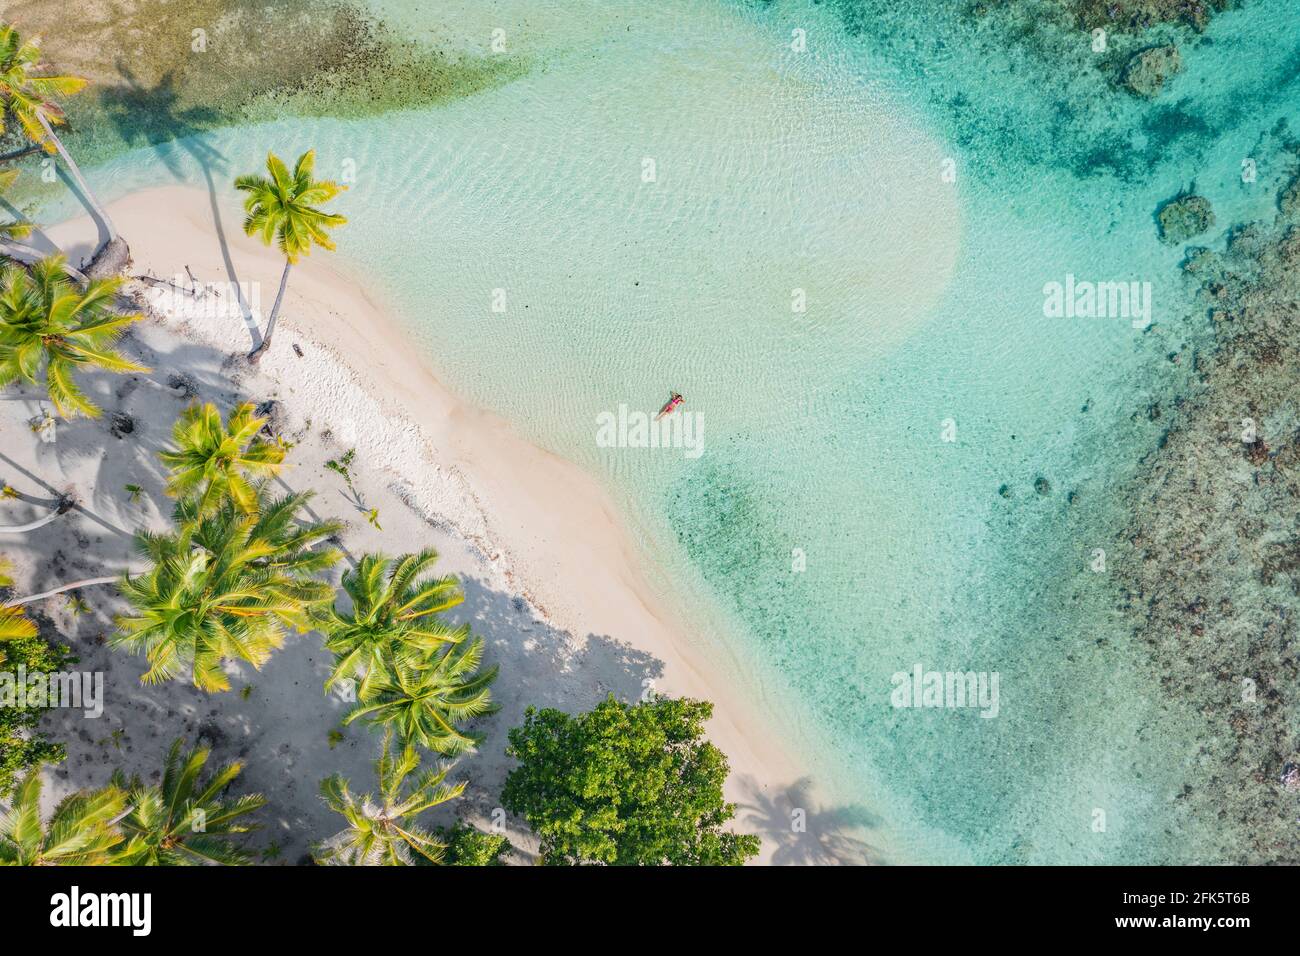 Beach travel vacation top down drone photo of luxury tropical paradise beach with elegant woman swimming in perfect turquoise water in coral reef Stock Photo